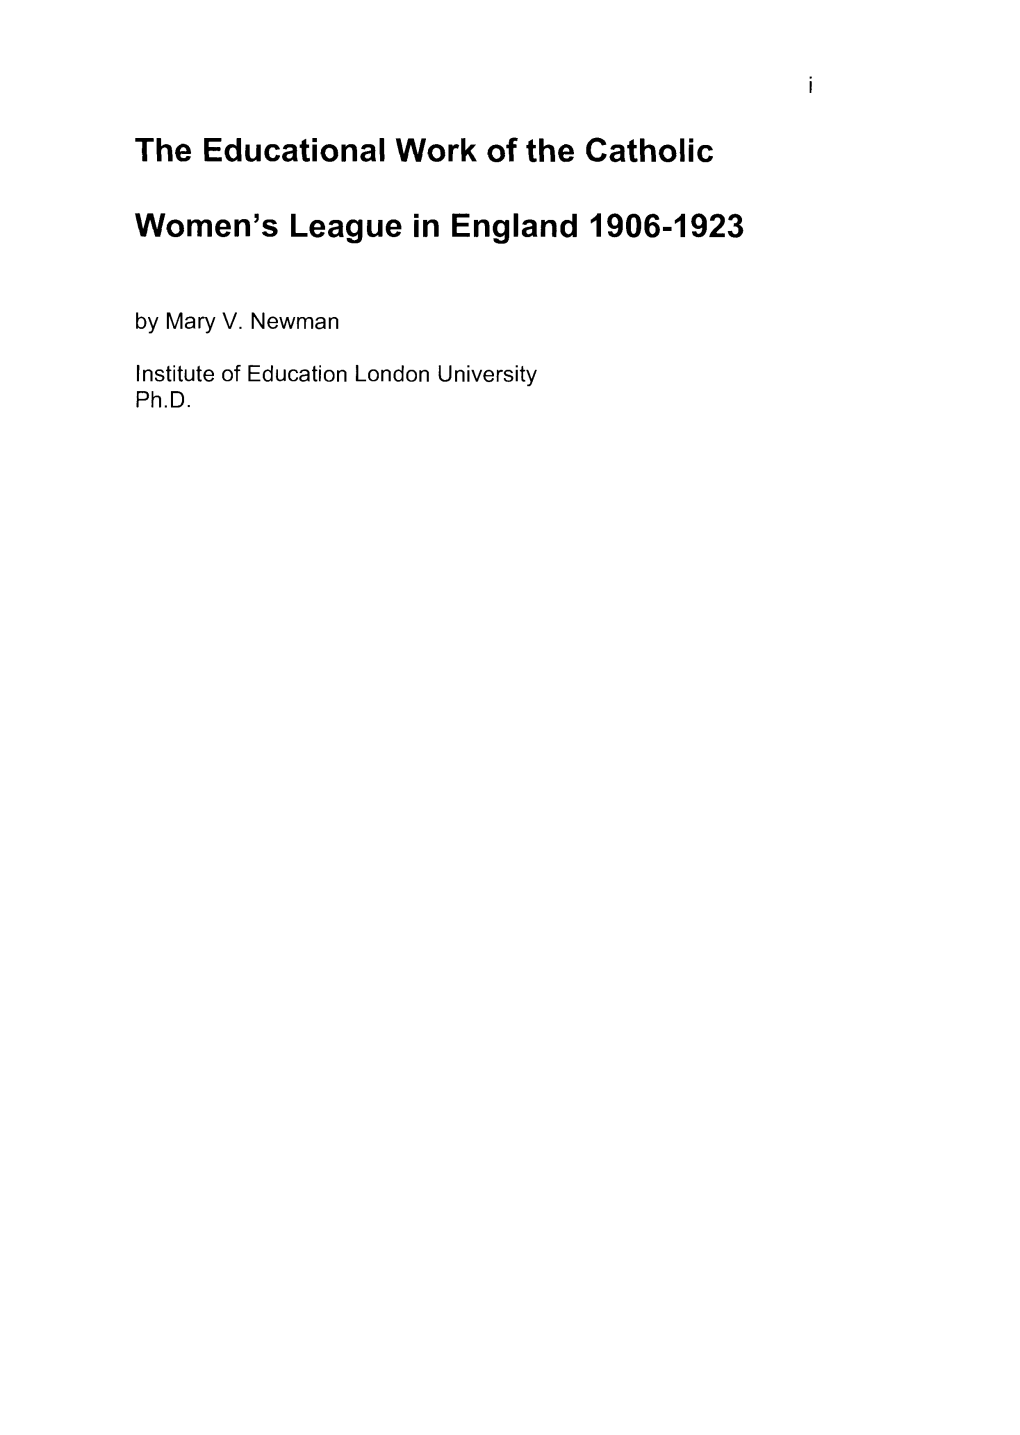 The Educational Work of the Catholic Women's League in England 1906